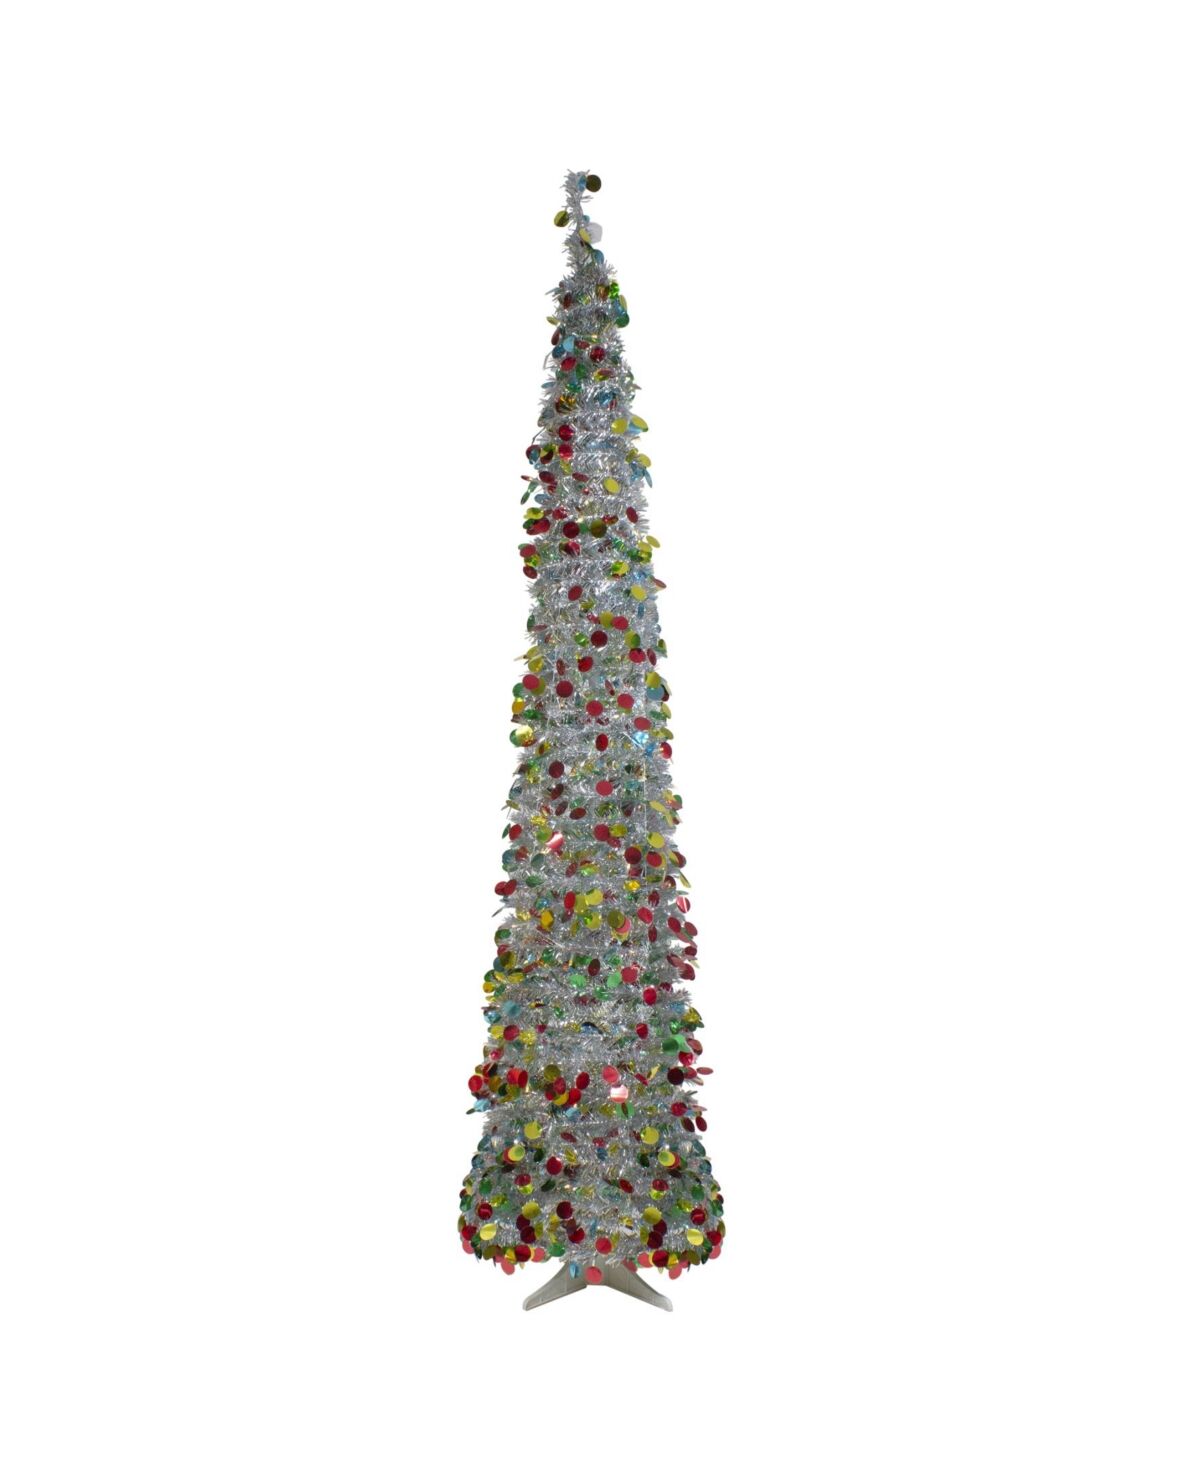 Northlight 6' Pre-Lit Tinsel Pop-Up Artificial Christmas Tree - Silver-Tone